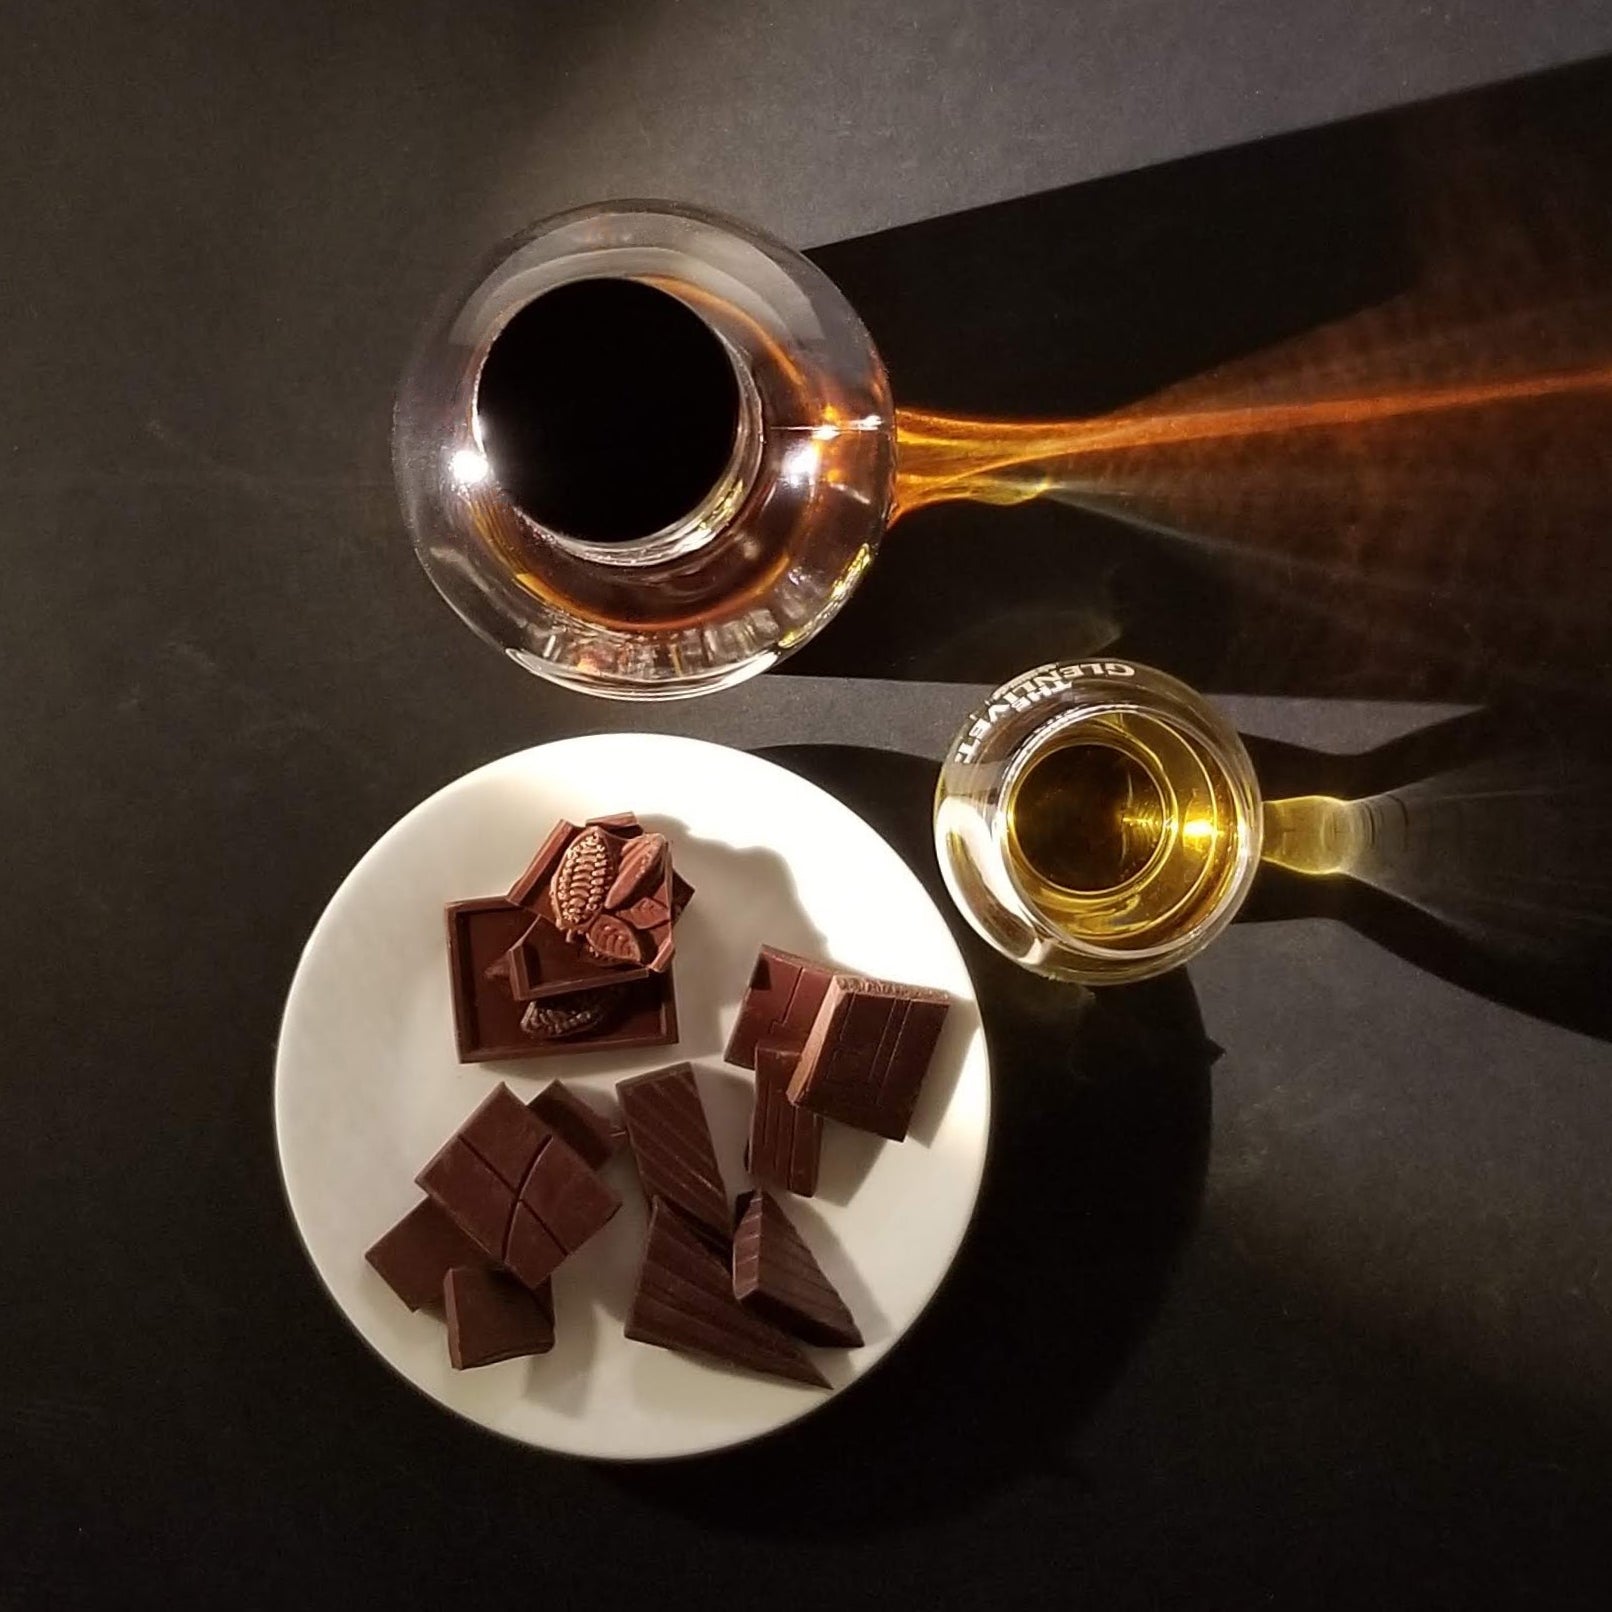 whisky and chocolate pairing notes, JoJo CoCo, Canada